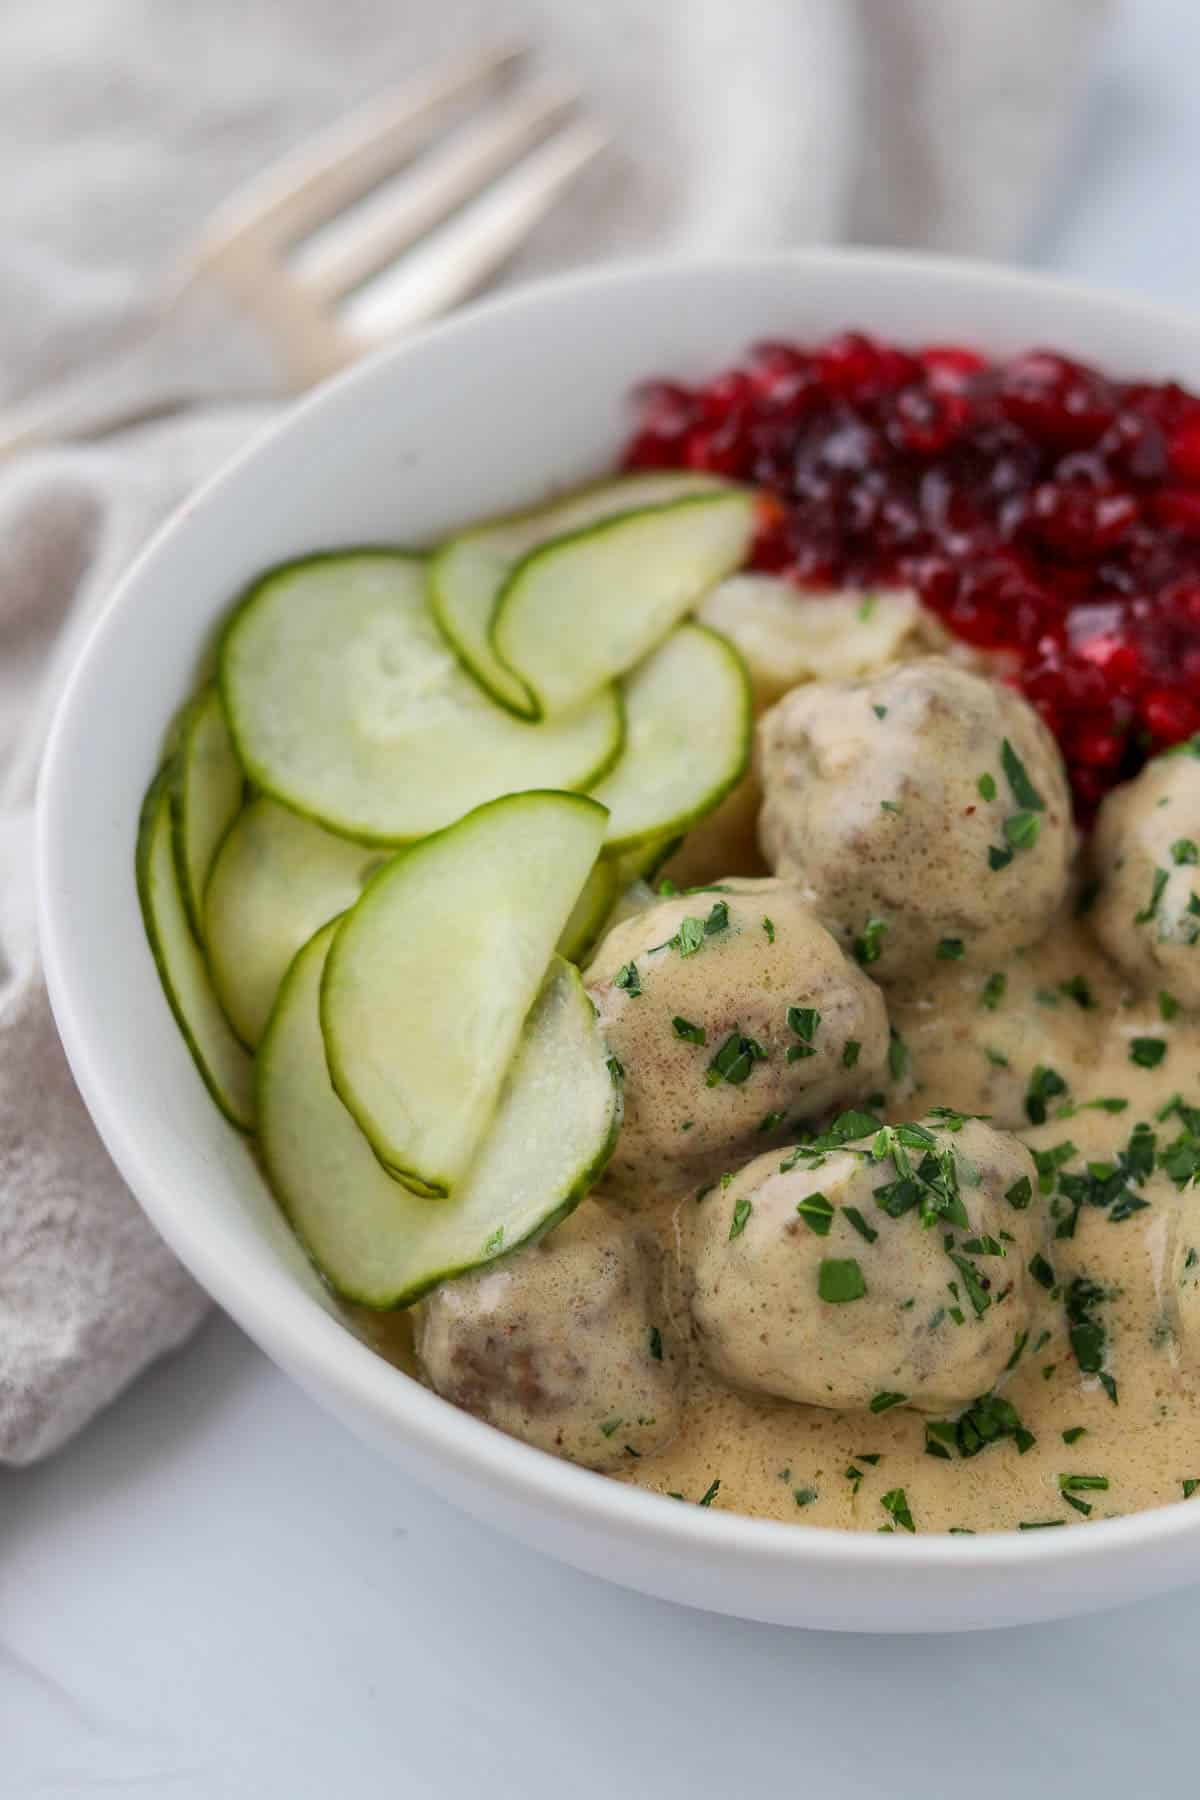 Swedish meatballs in a bowl with cucumbers and lingonberries.